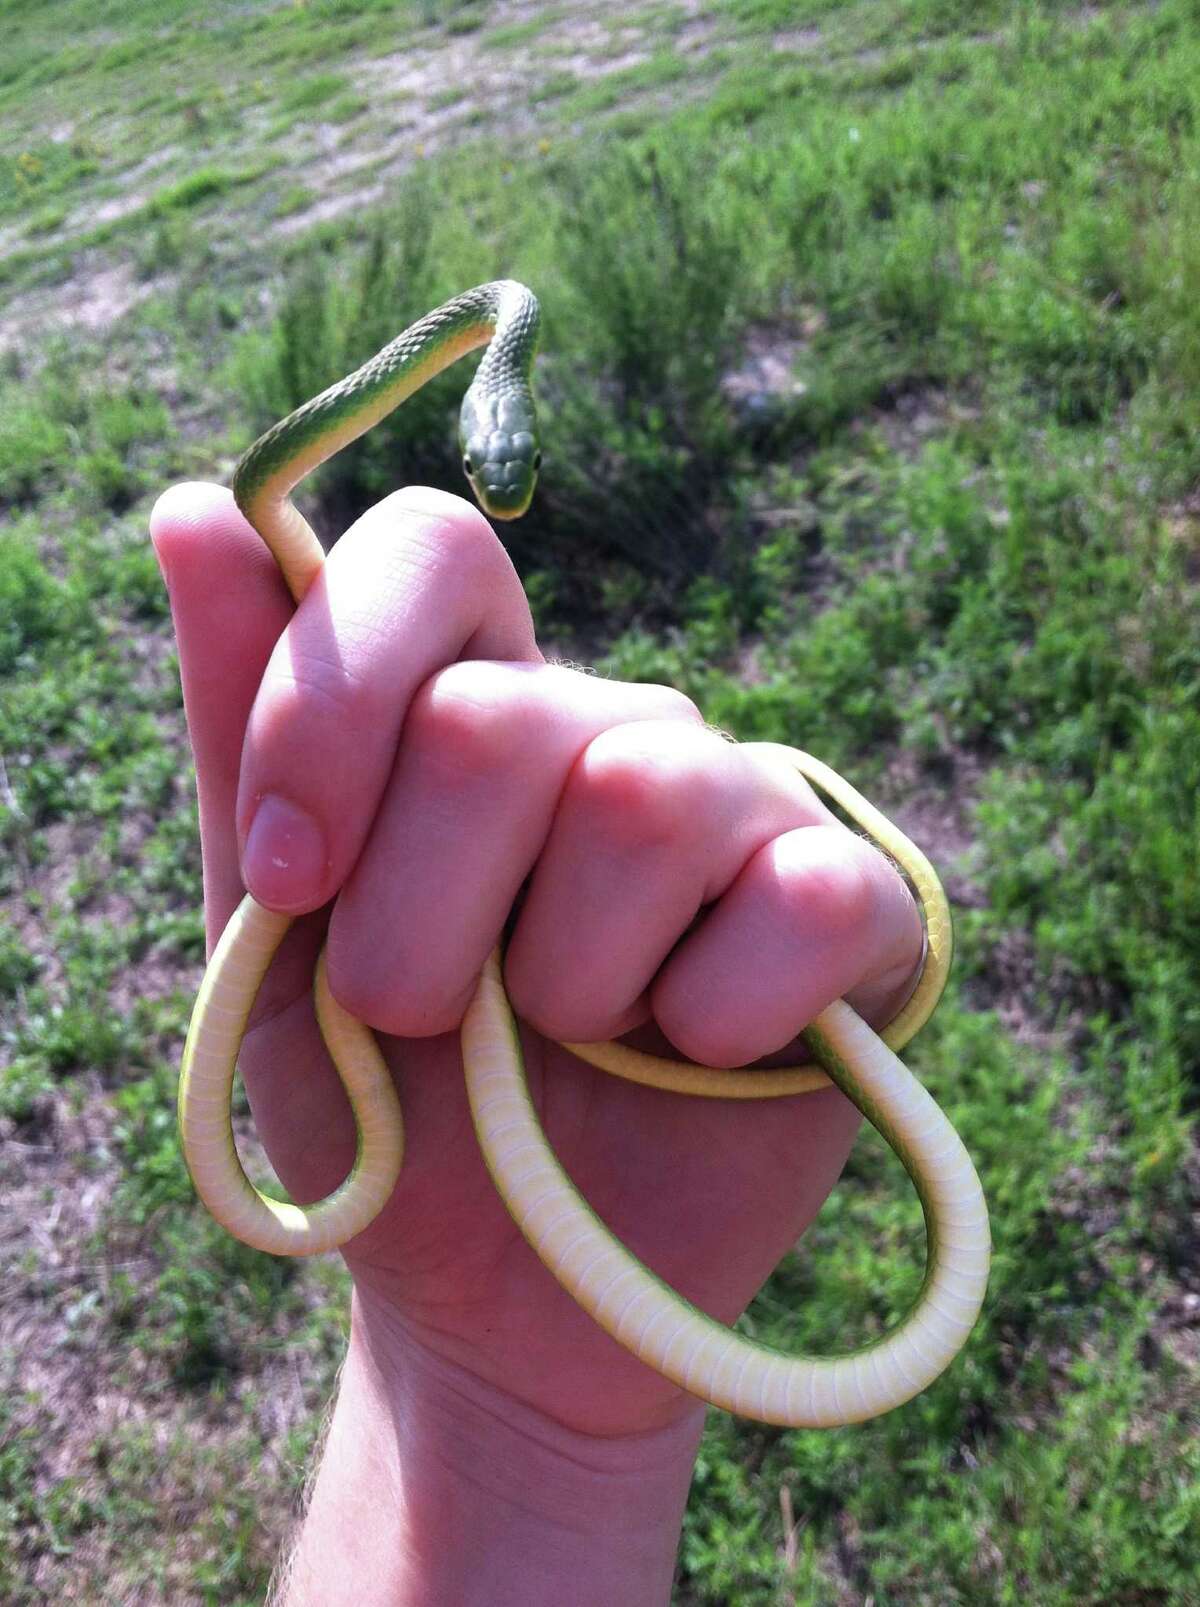 The Katy Prairie Conservancy will present Ã©Unplugged Adventure: Summer SnakesÃ© on Aug. 7 from 6:30-7:45 p.m. in the air-conditioned comfort of the KPC offices. Pictured here is the green rough snake.